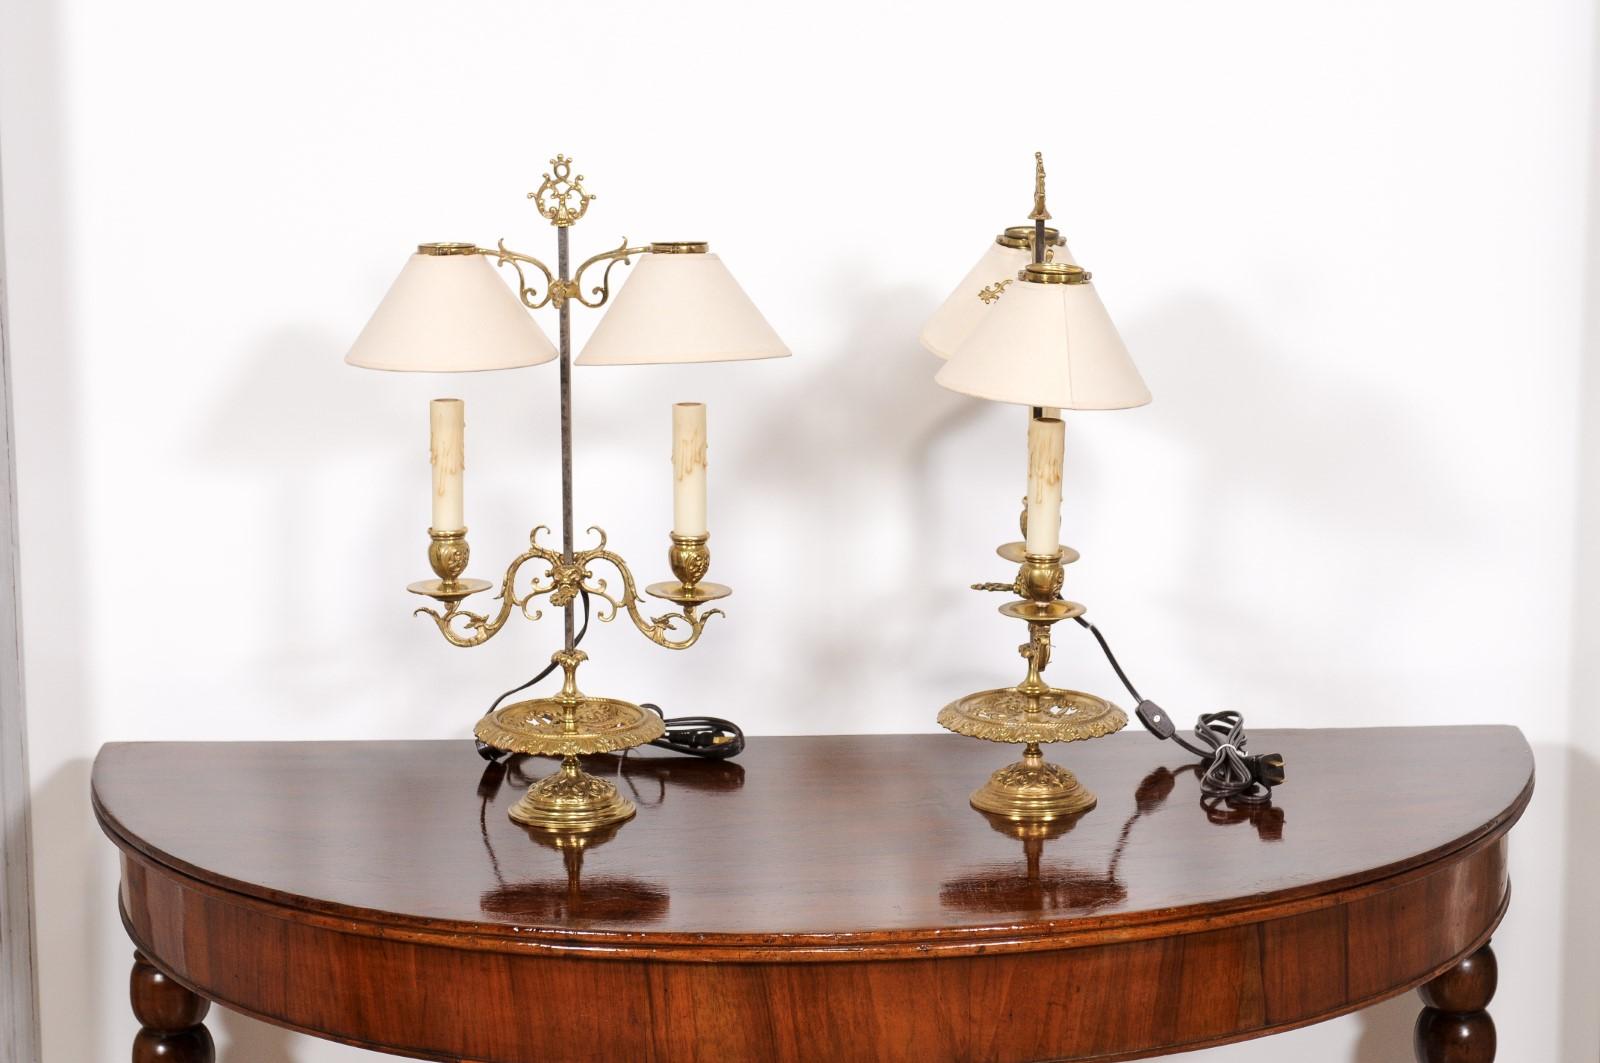 French 19th Century Brass Candlestick Lamps with Scrolling Arms, a Wired Pair For Sale 10